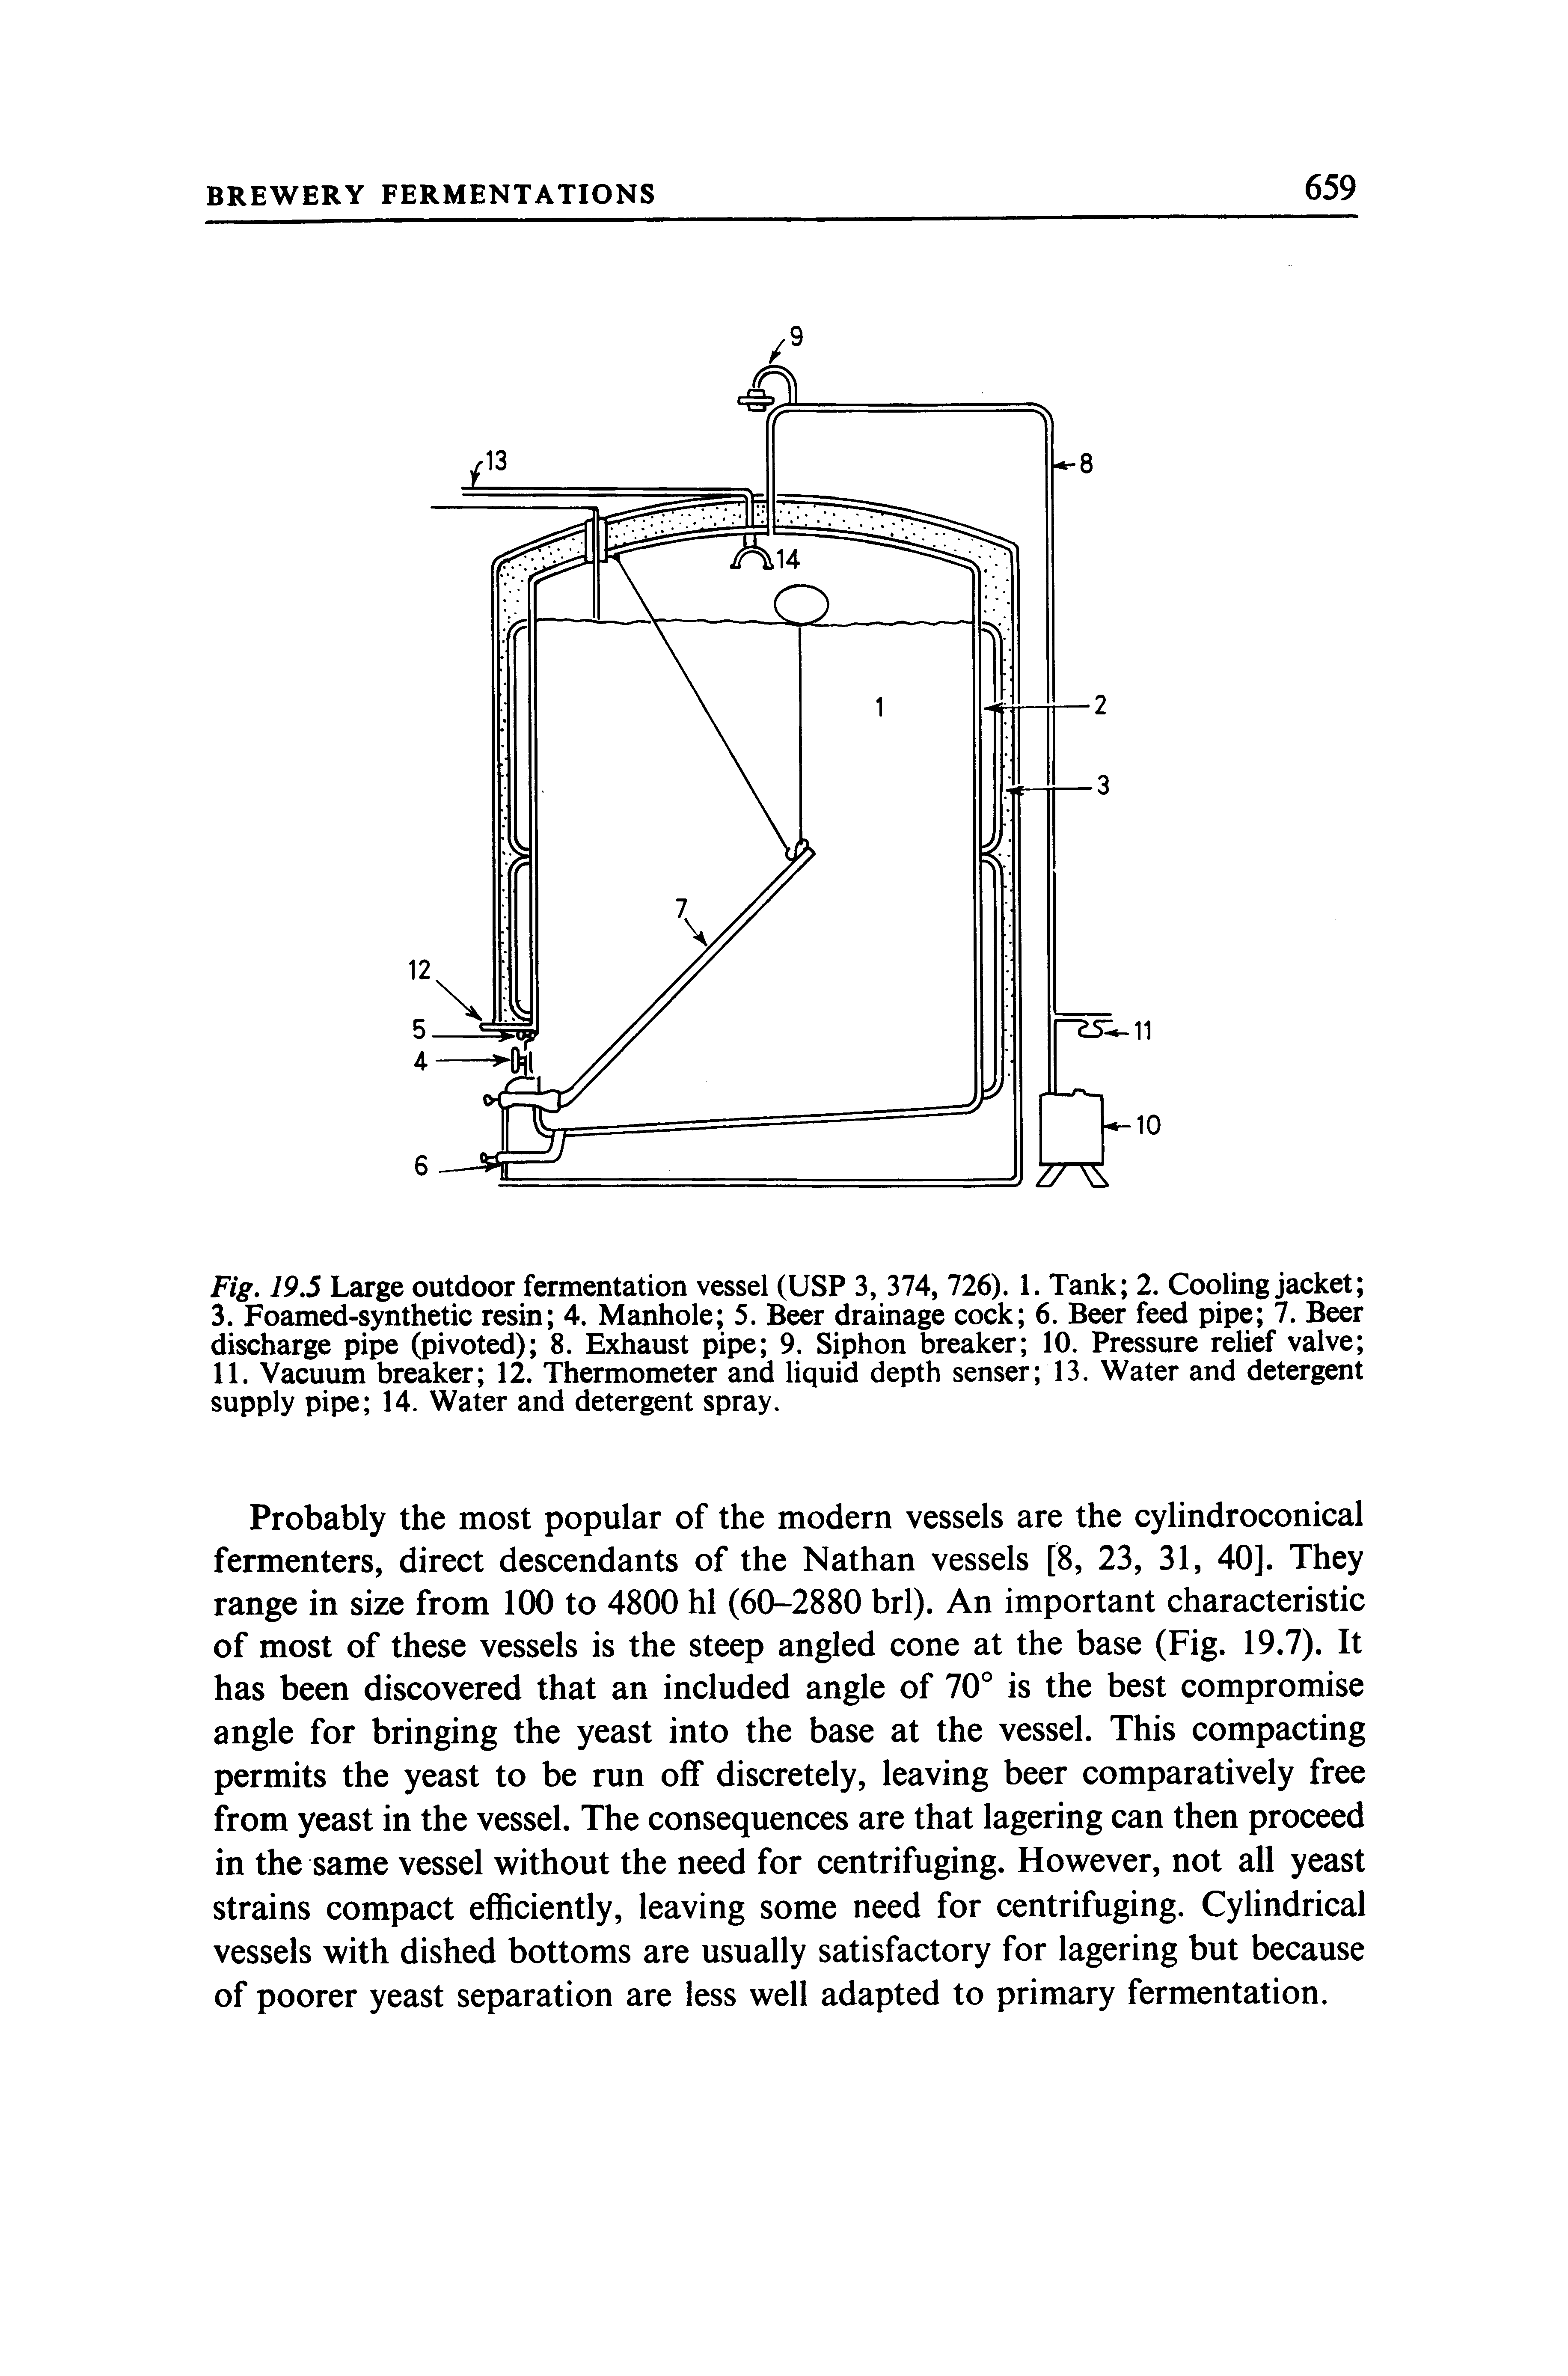 Fig. 19.5 Large outdoor fermentation vessel (USP 3, 374, 726). 1. Tank 2. Cooling jacket 3. Foamed-synthetic resin 4. Manhole 5. Beer drainage cock 6. Beer feed pipe 7. Beer discharge pipe (pivoted) 8. Exhaust pipe 9. Siphon breaker 10. Pressure relief valve 11. Vacuum breaker 12. Thermometer and liquid depth senser 13. Water and detergent supply pipe 14. Water and detergent spray.